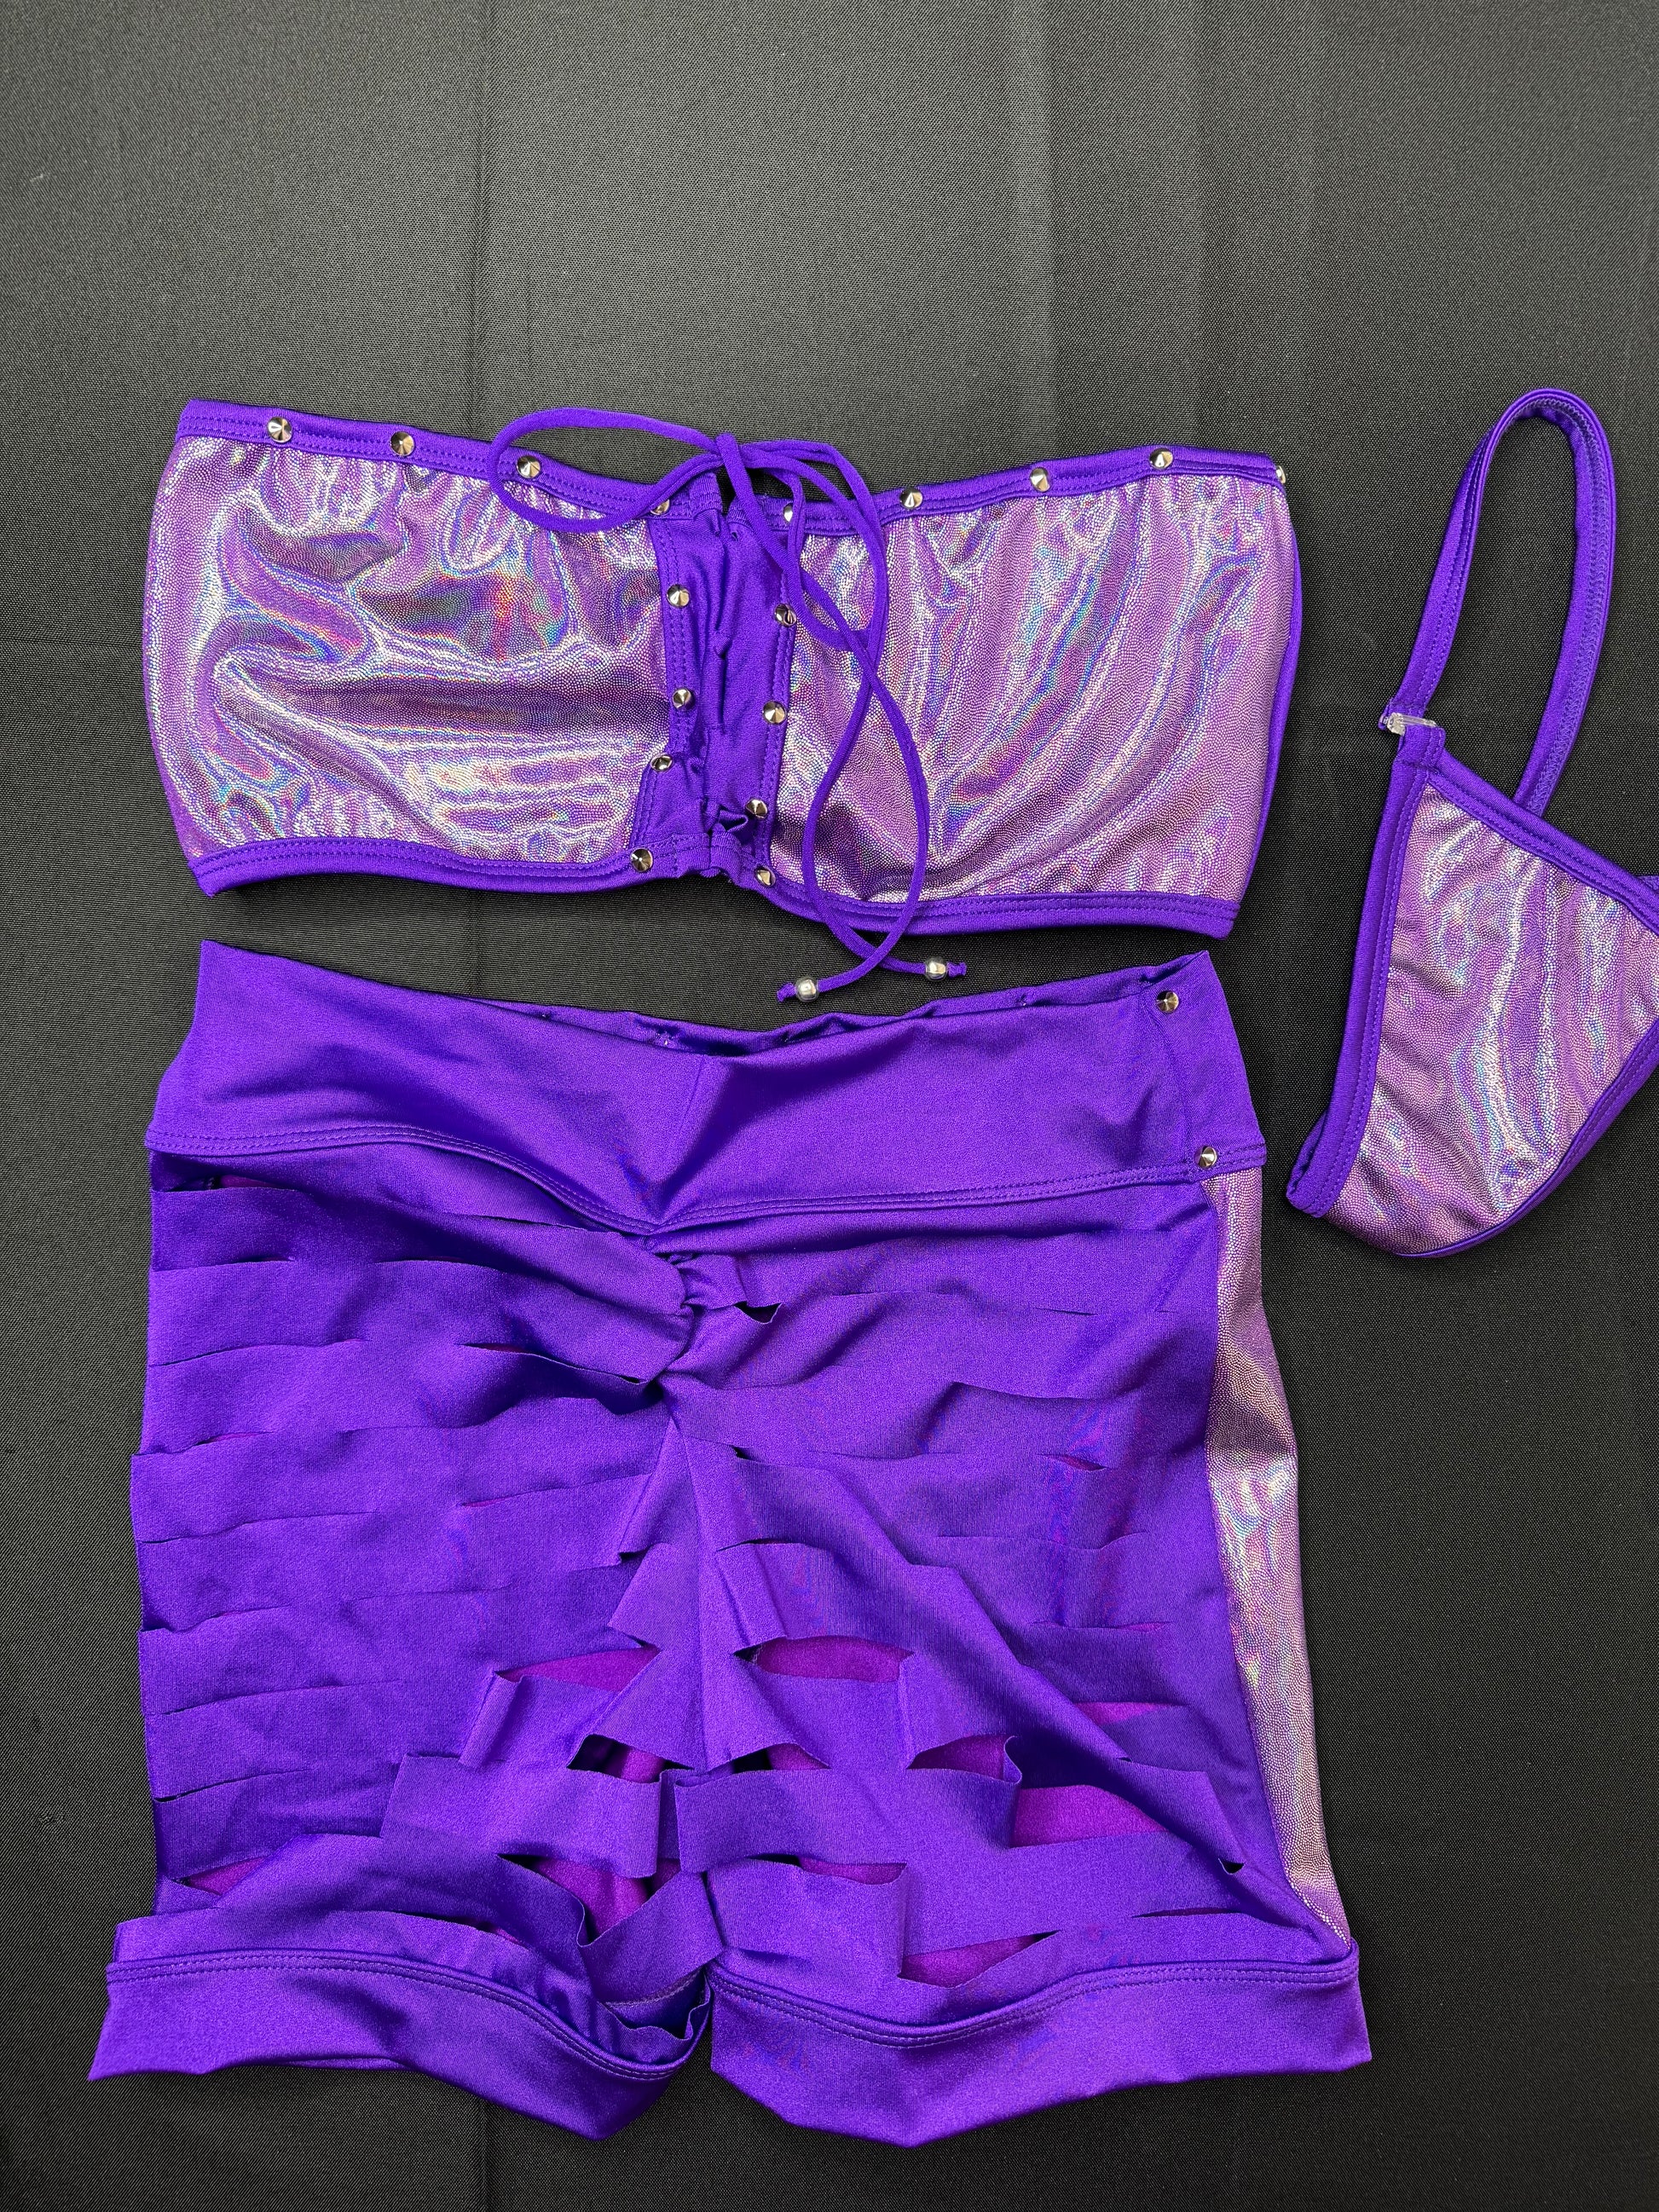 Metallic Purple/Purple Two-Piece Ripped Back Shorts Lingerie Outfit